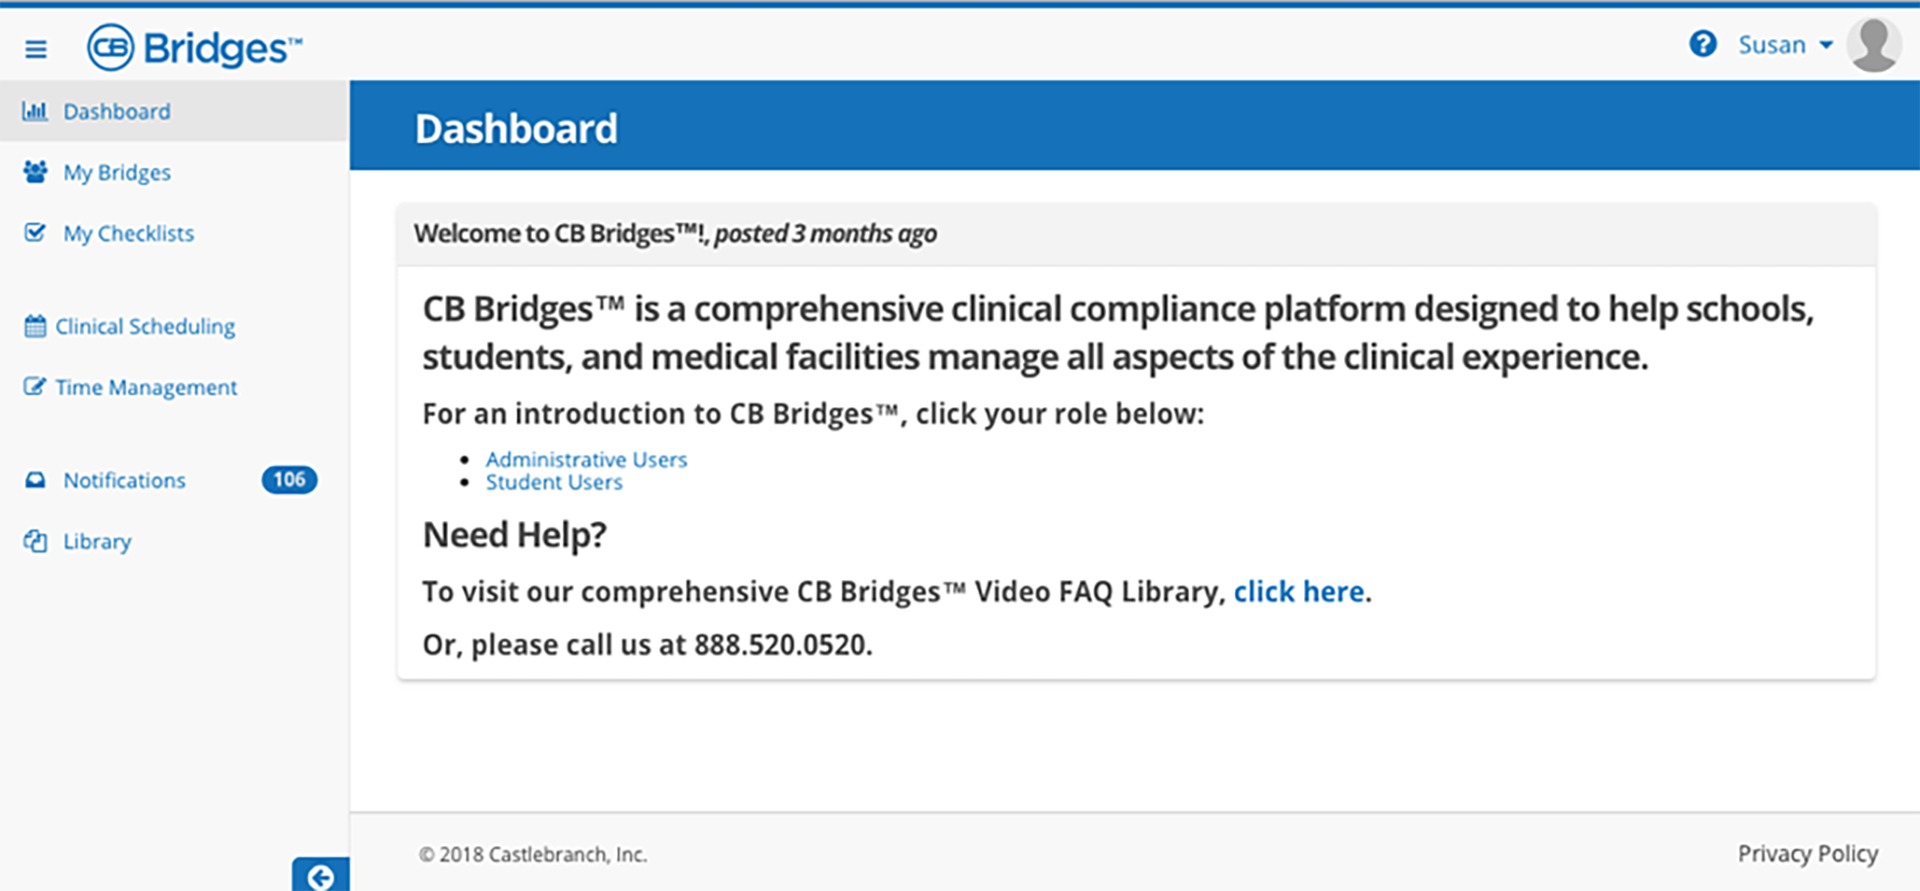 CB Bridges™ Clinical Placement myCB and AP to CB Bridges™ Single Sign On—Step 5: Once myCB users select the CB Bridges™ link, they will automatically be logged into the corresponding CB Bridges™ account.